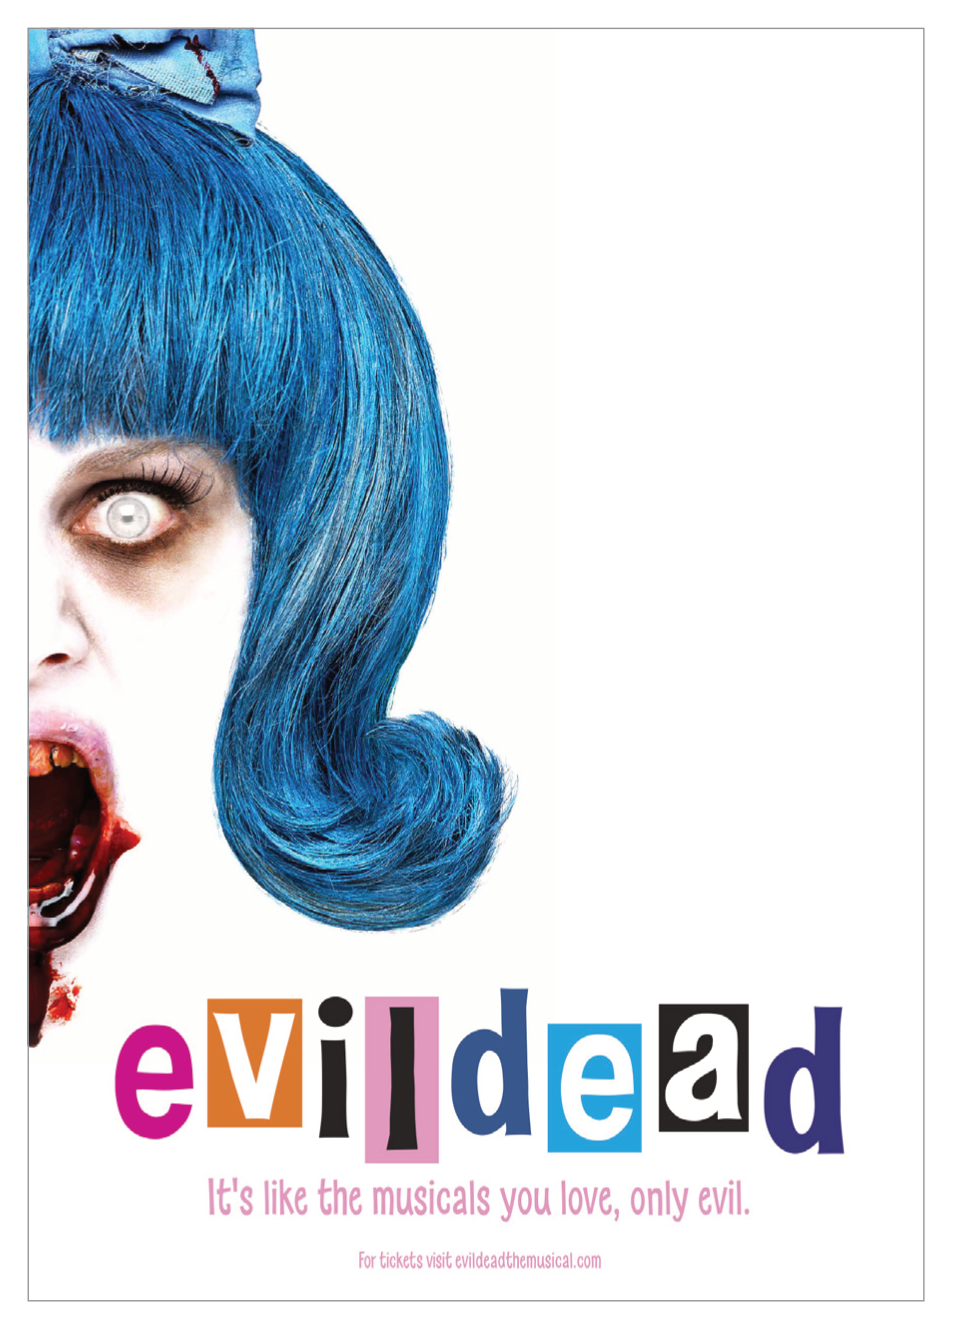  An Evil Dead parody poster of Hair Spray. The woman with blue hair’s face looks like a zombie. Poster reads Evil Dead. It's like the musicals you love, only evil.